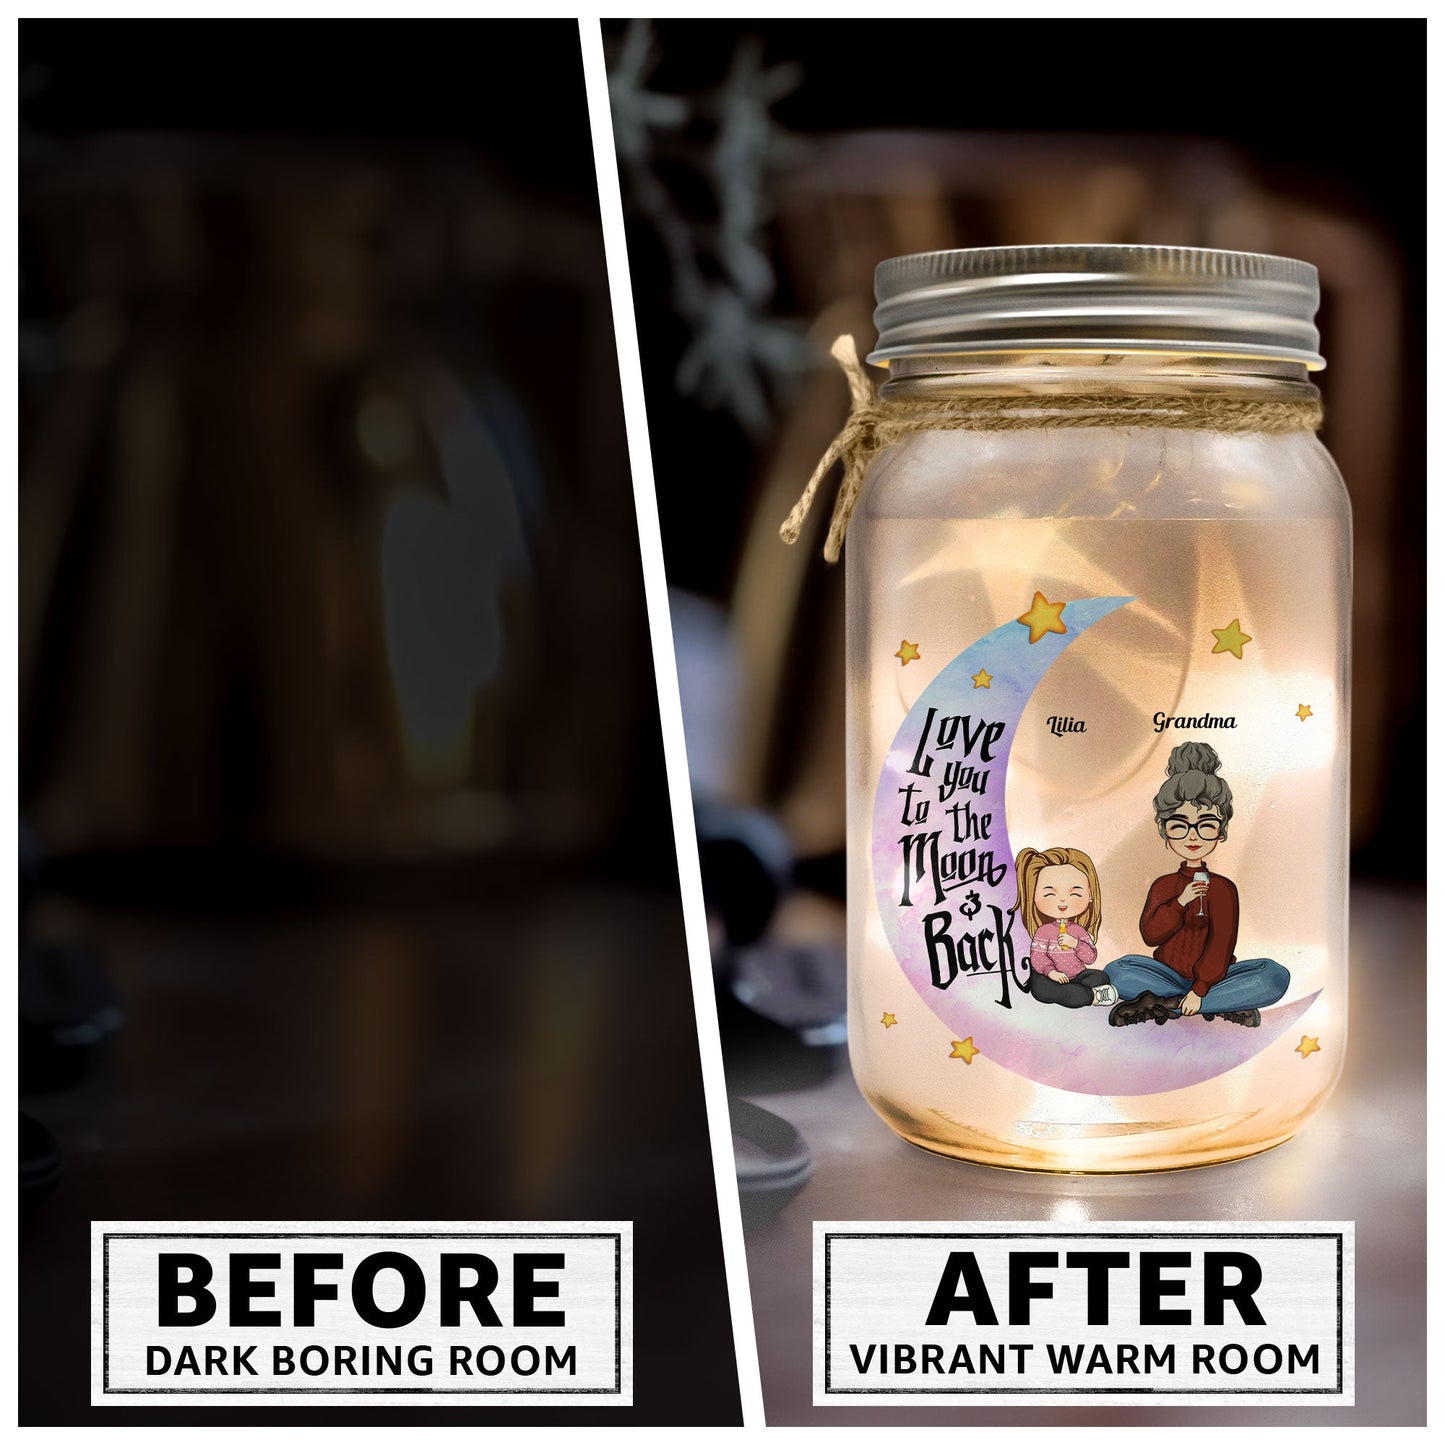 I Love You To The Moon And Back Kid - Personalized Mason Jar Light